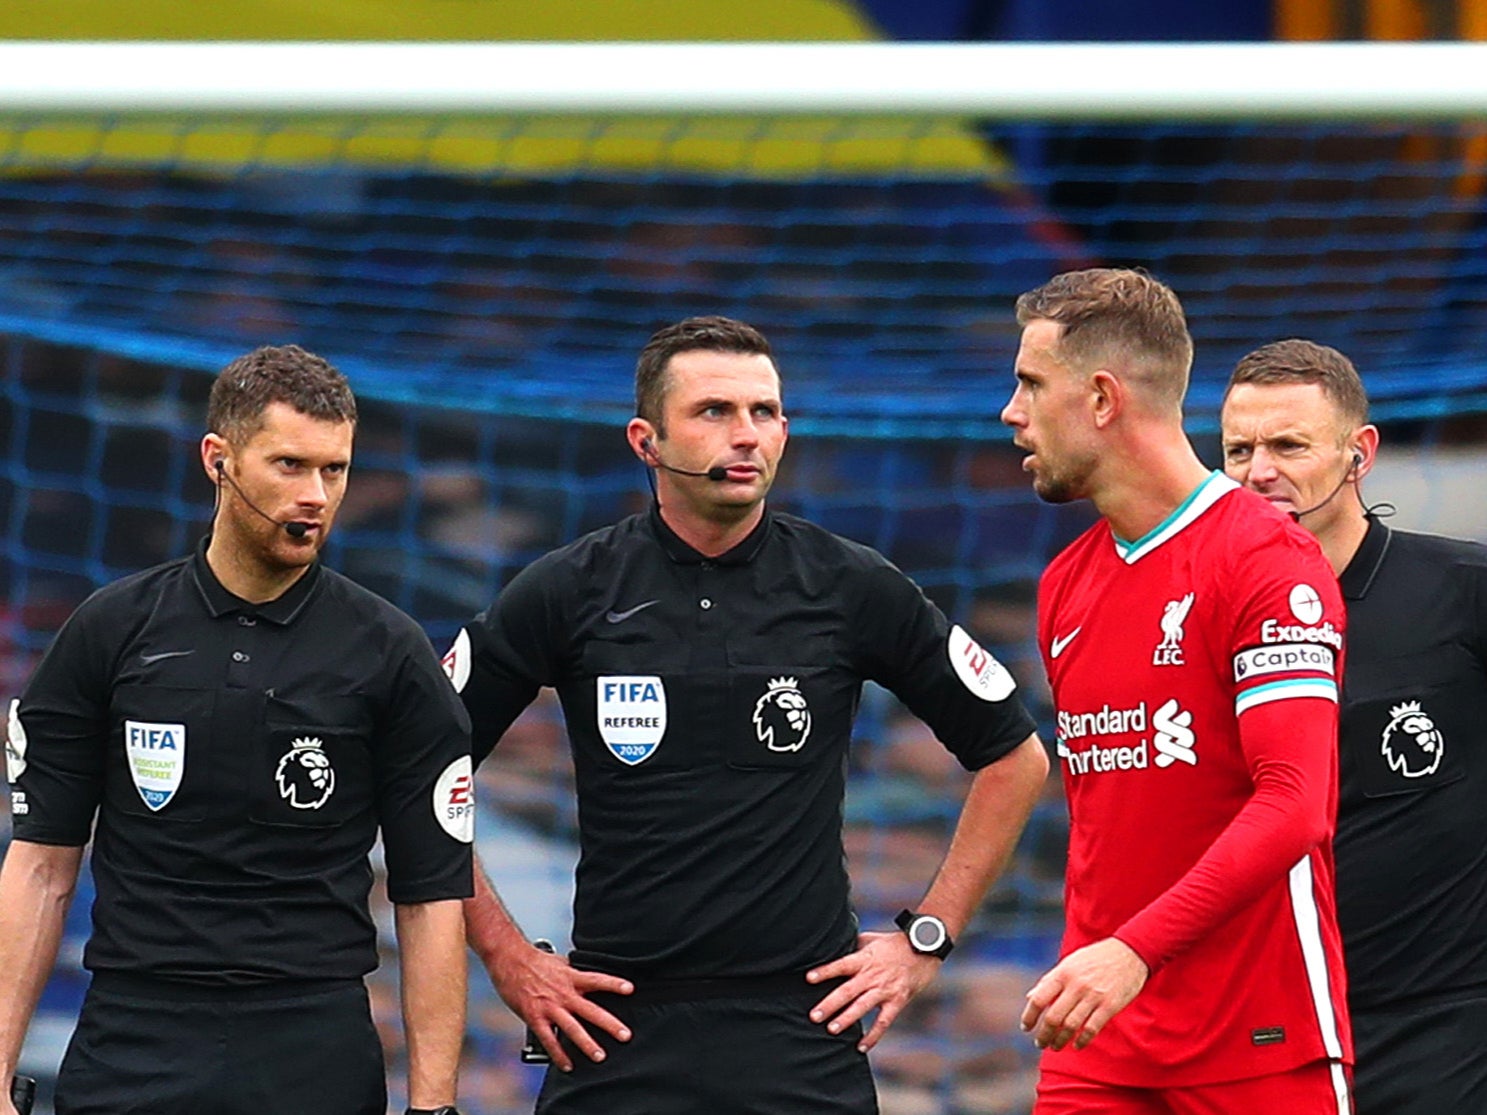 Jordan Henderson speaks with match officials after his goal is disallowed